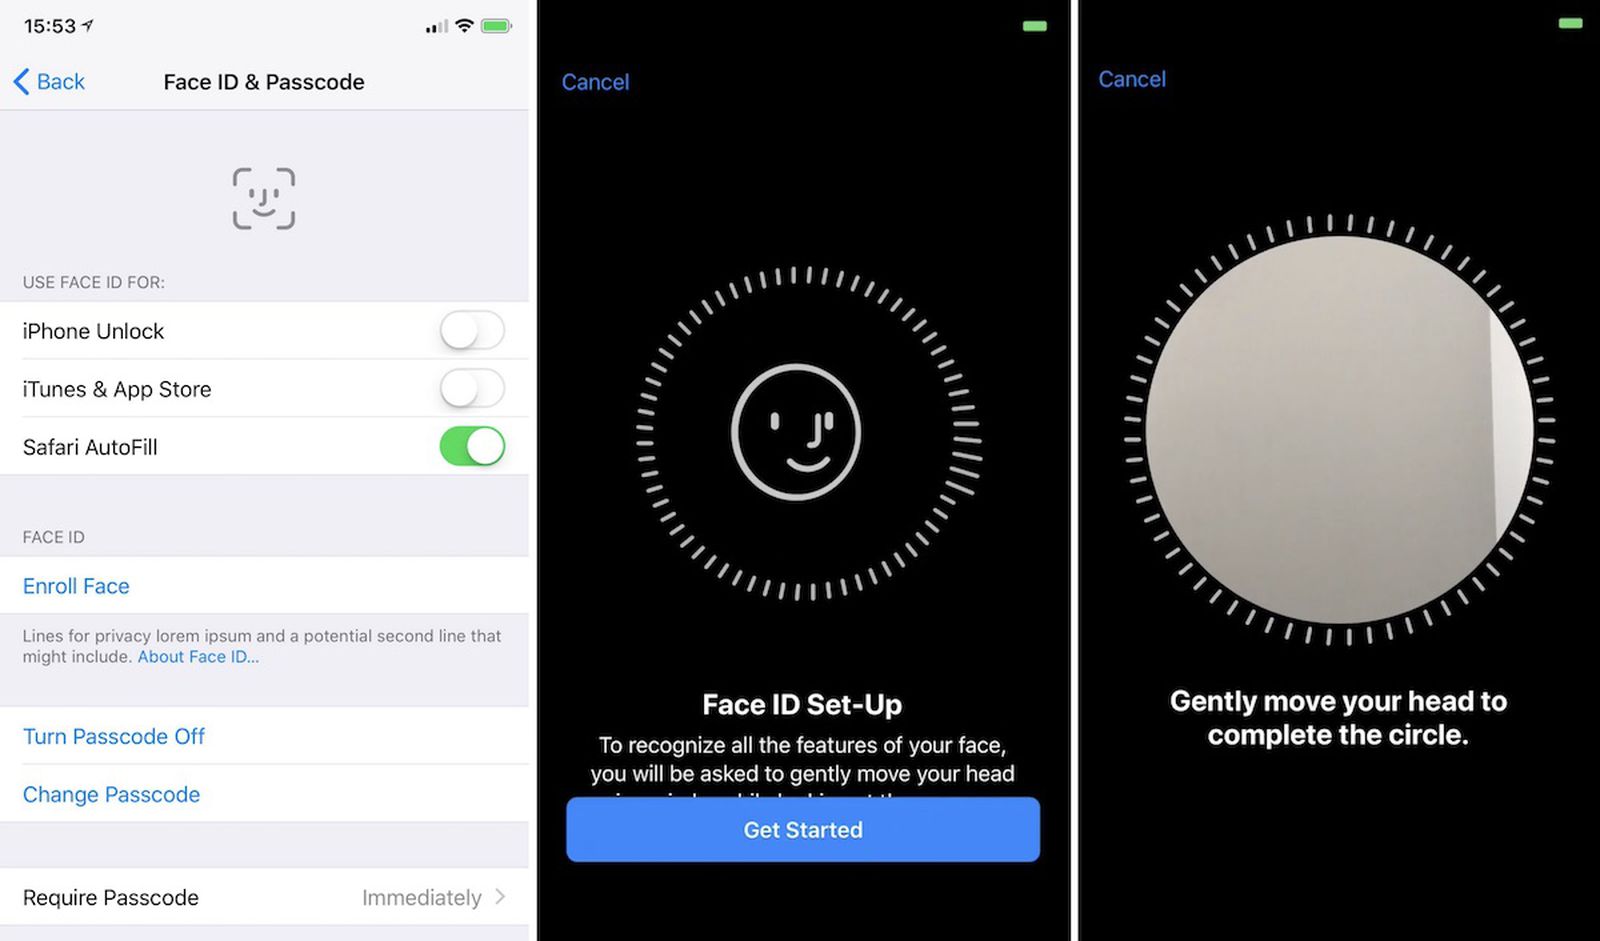 face-id-setup-a-step-by-step-guide-for-iphone-11-users